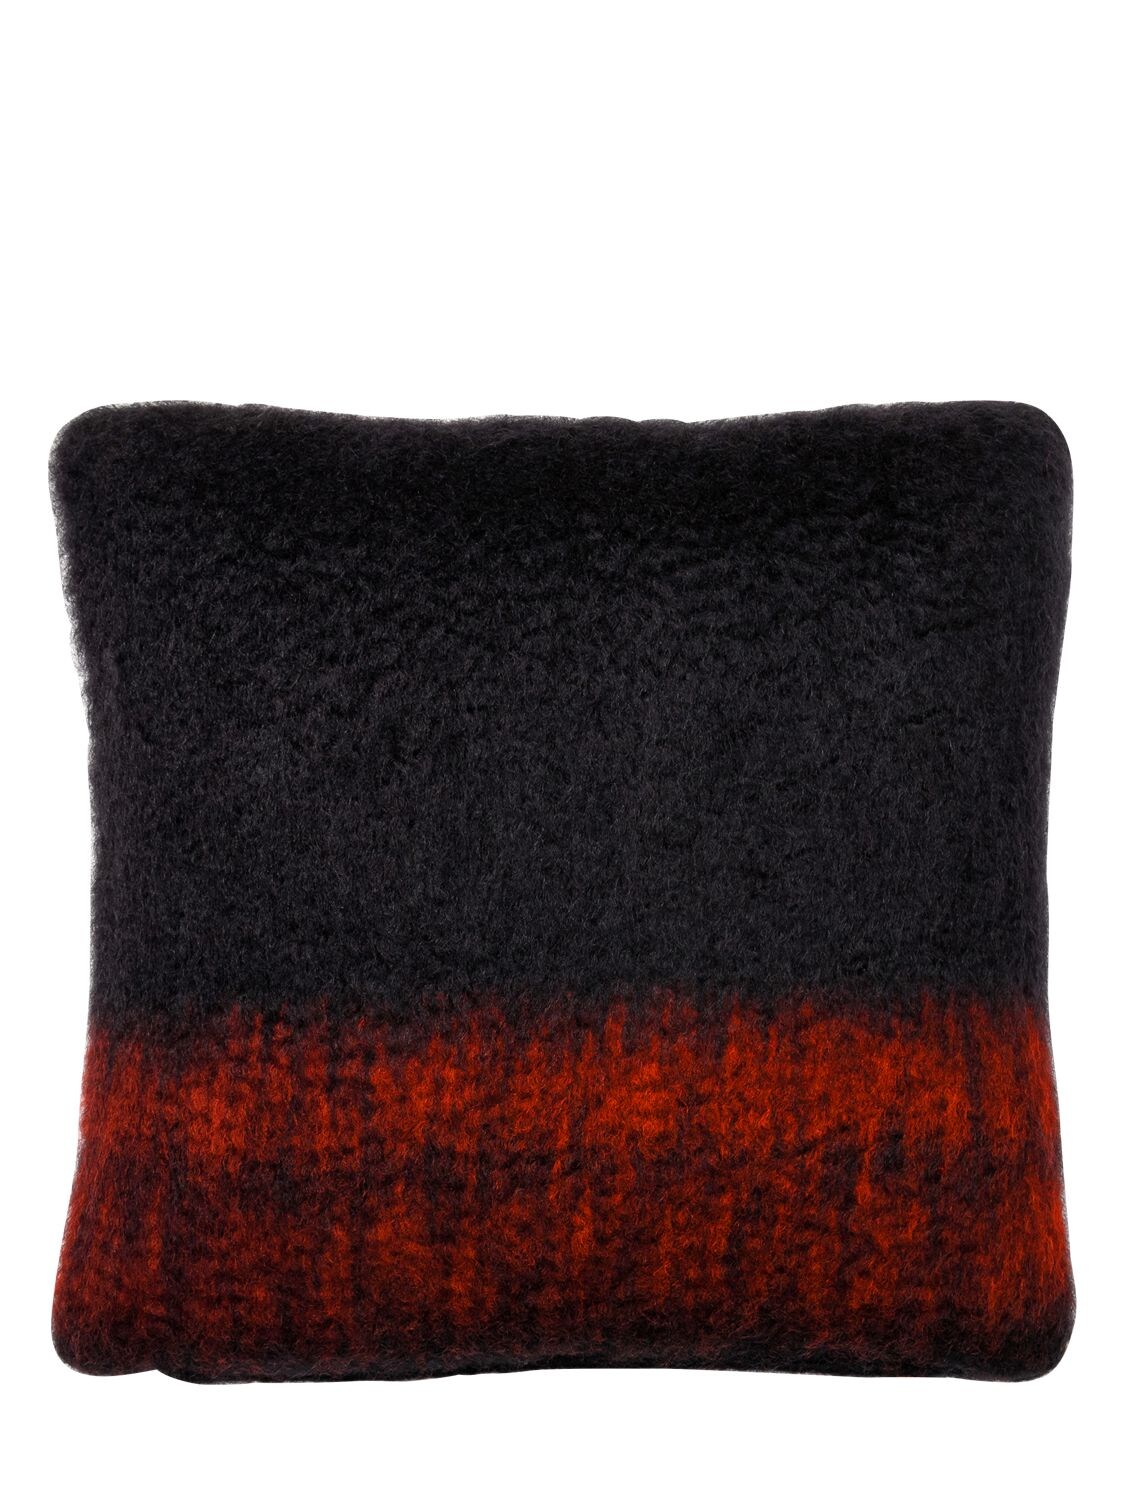 Viso Project Mohair Pillow In Black,red